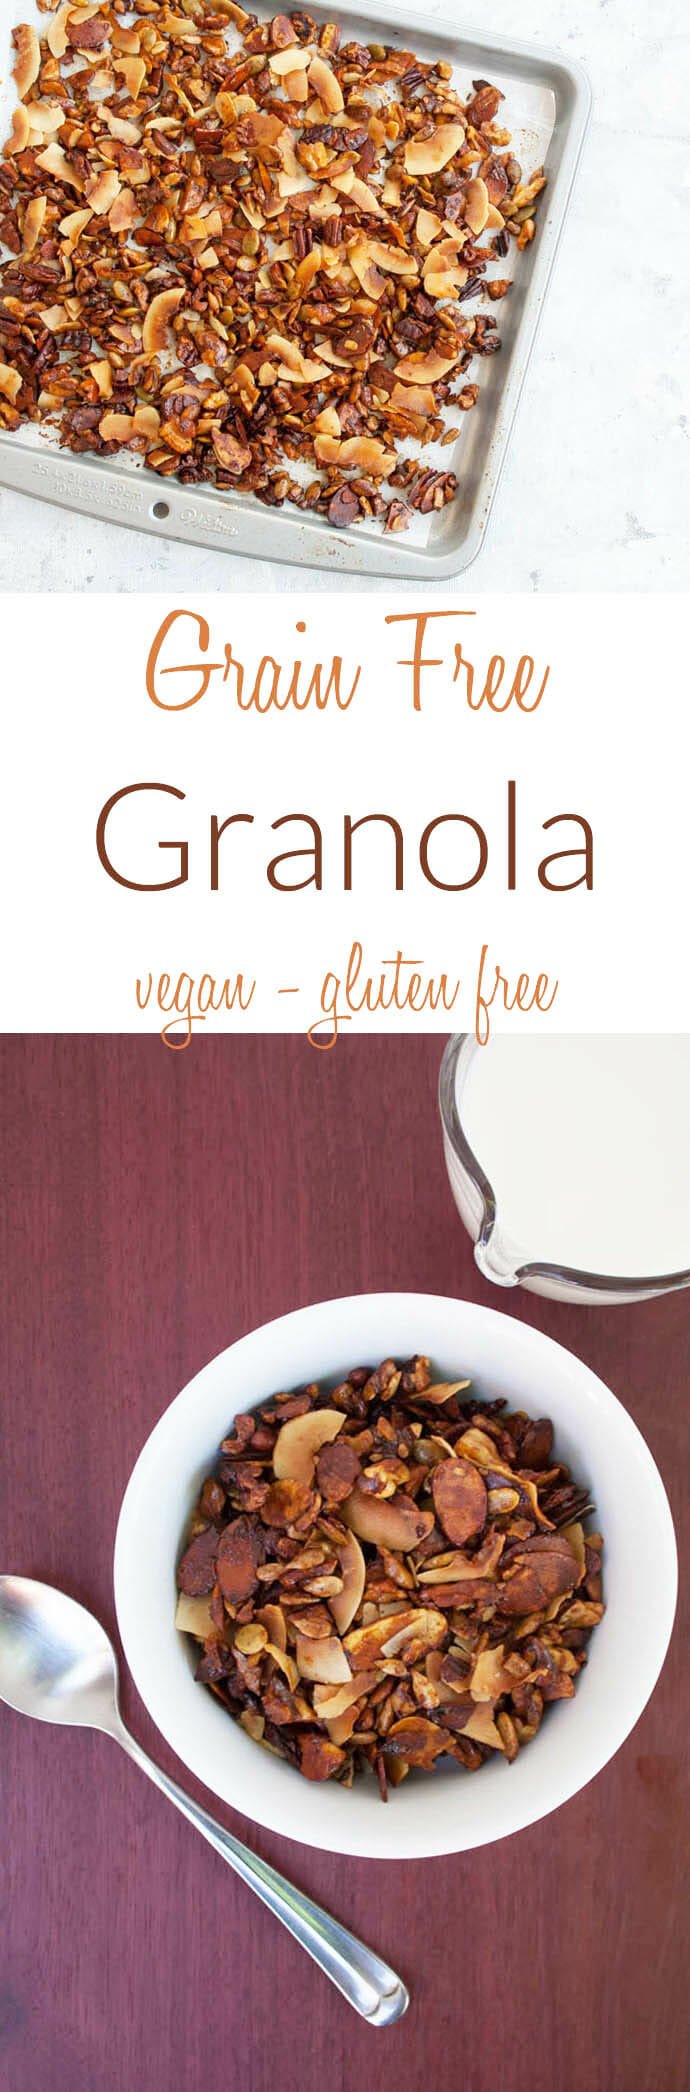 Grain Free Granola collage photo with text.